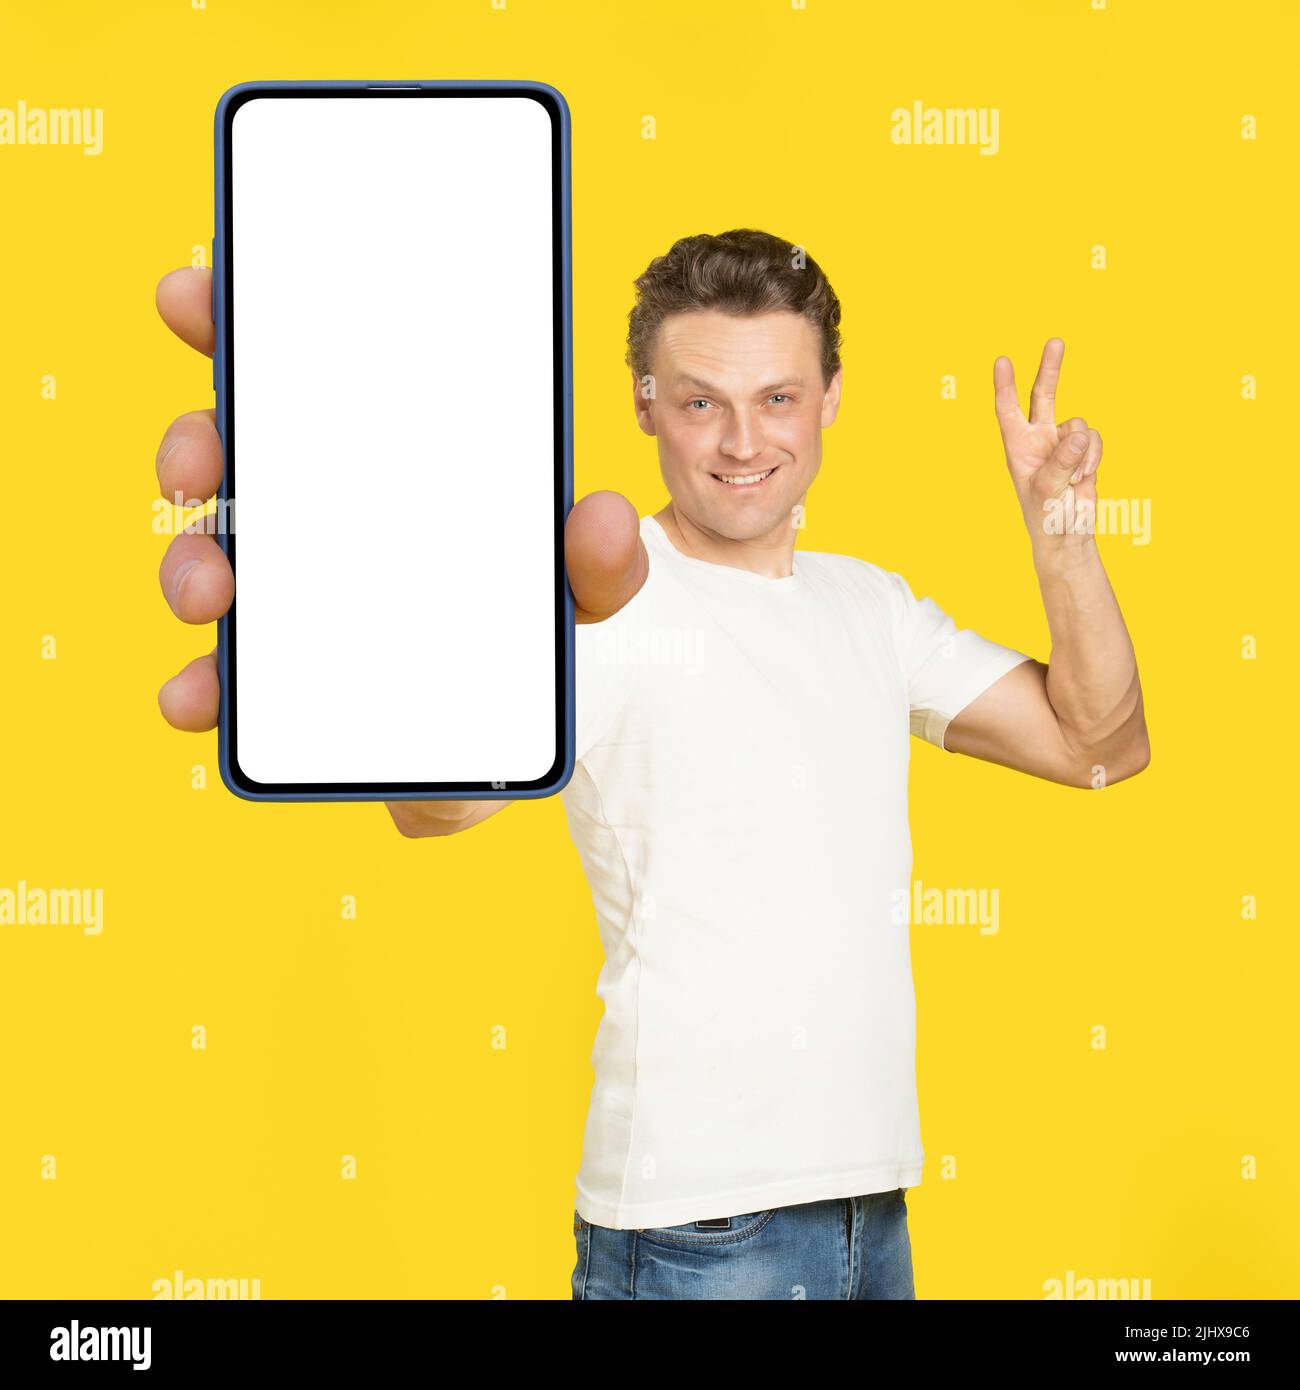 Gesturing V or victory handsome man holding huge smartphone with white screen wearing white t-shirt and jeans isolated on yellow background. Mobile app advertisement, great offer. Stock Photo